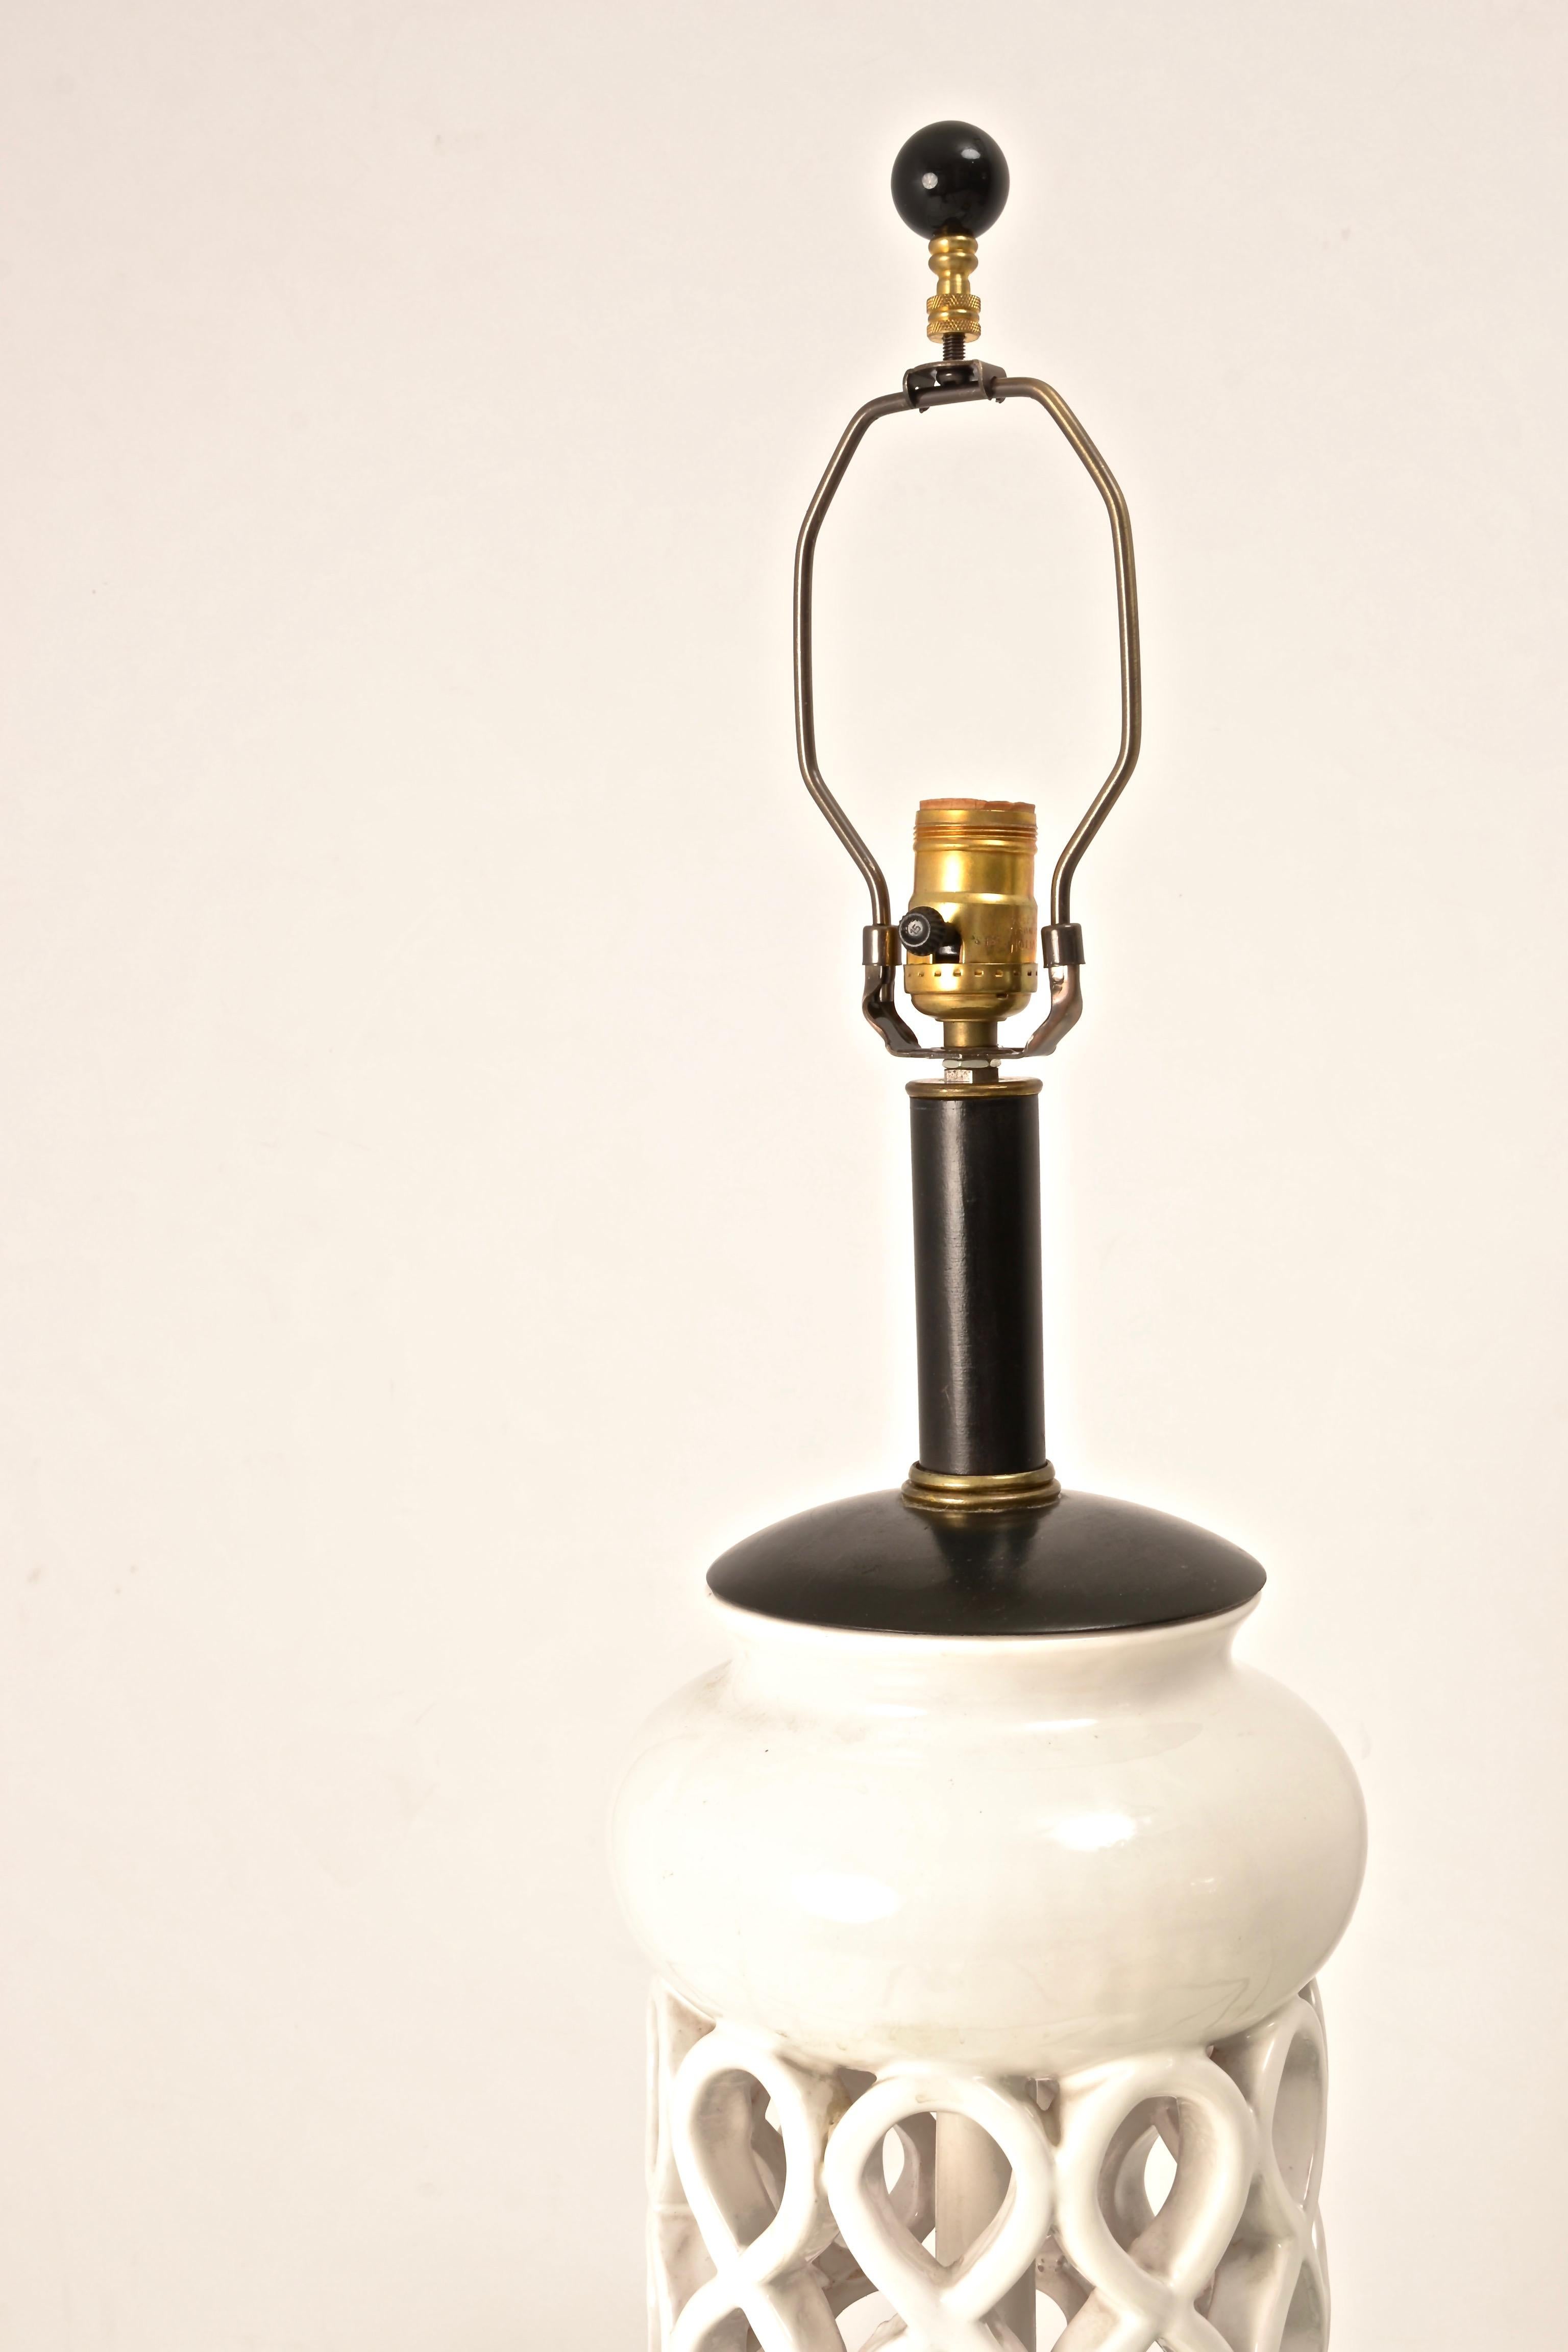 Sculptural Mid-Century Modern Ceramic Lamp In Good Condition For Sale In Norwalk, CT